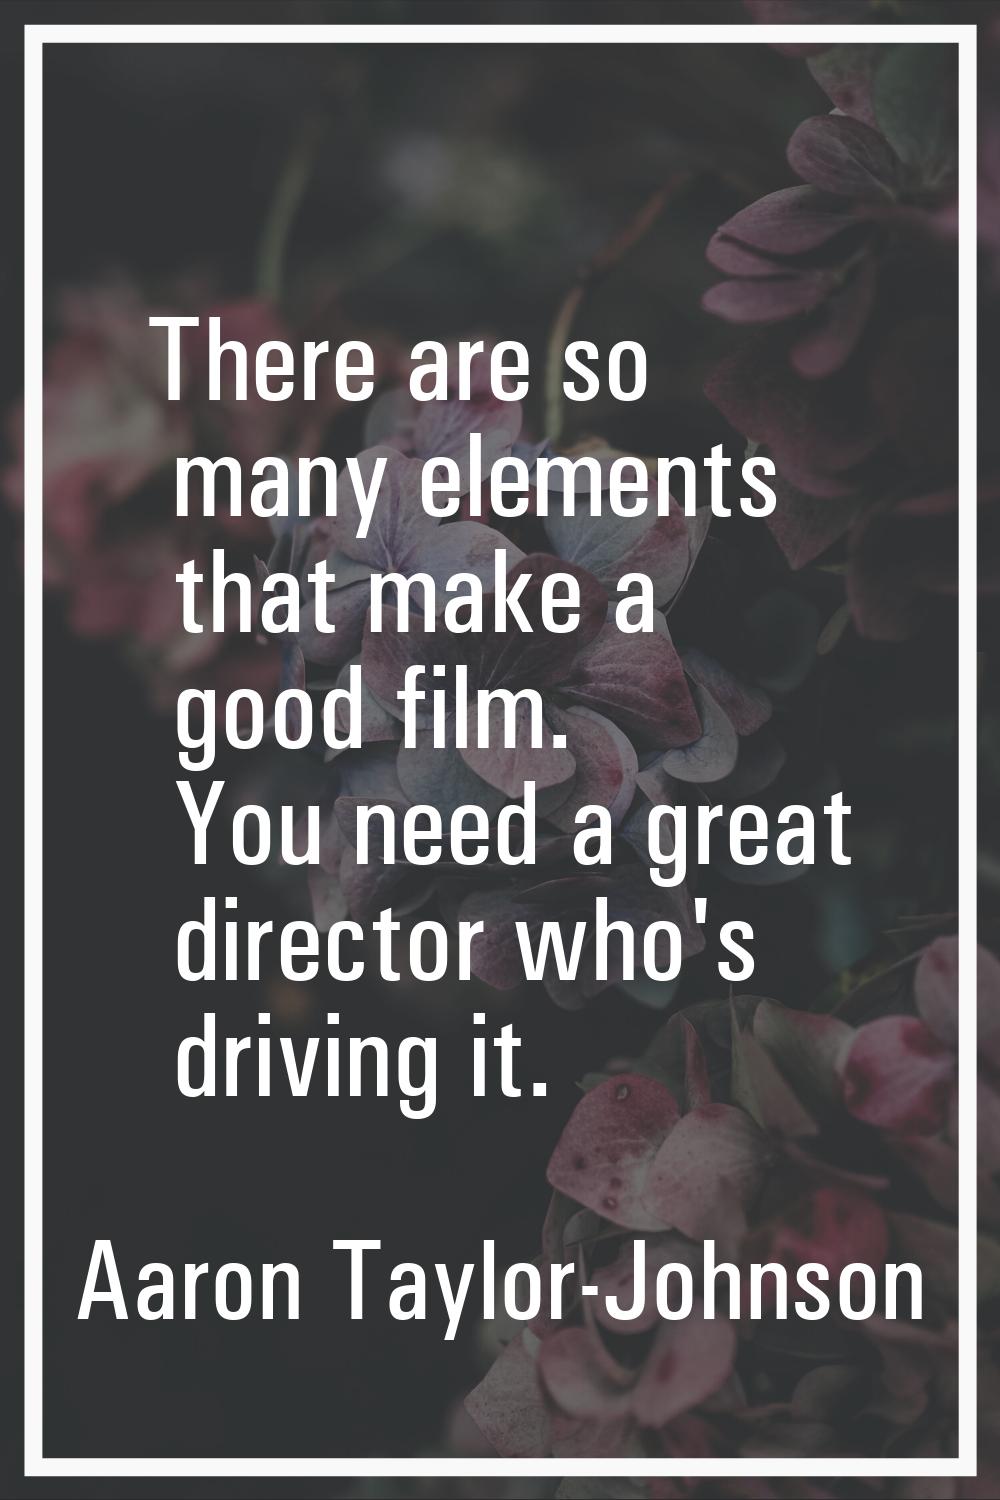 There are so many elements that make a good film. You need a great director who's driving it.